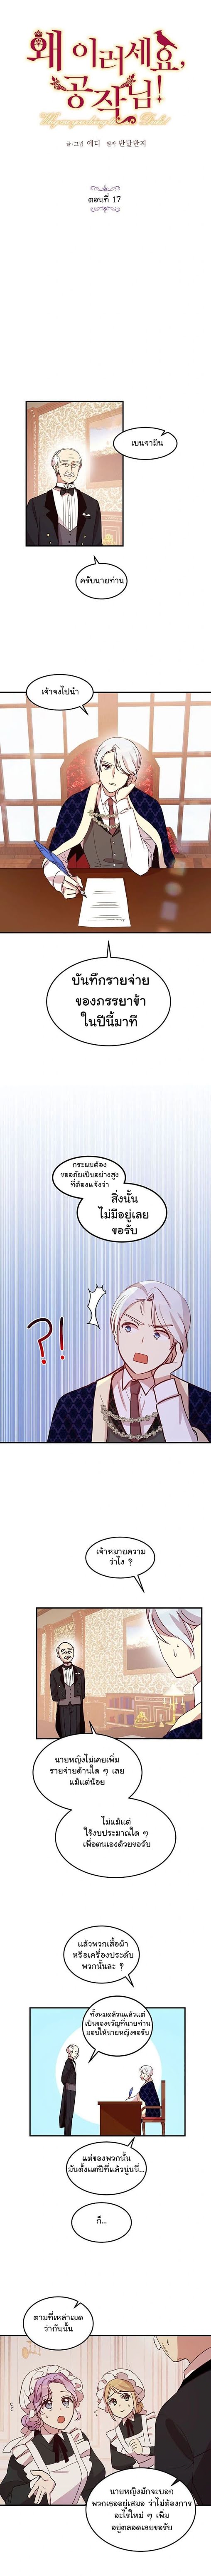 Why Are You Doing This, Duke? - หน้า 2